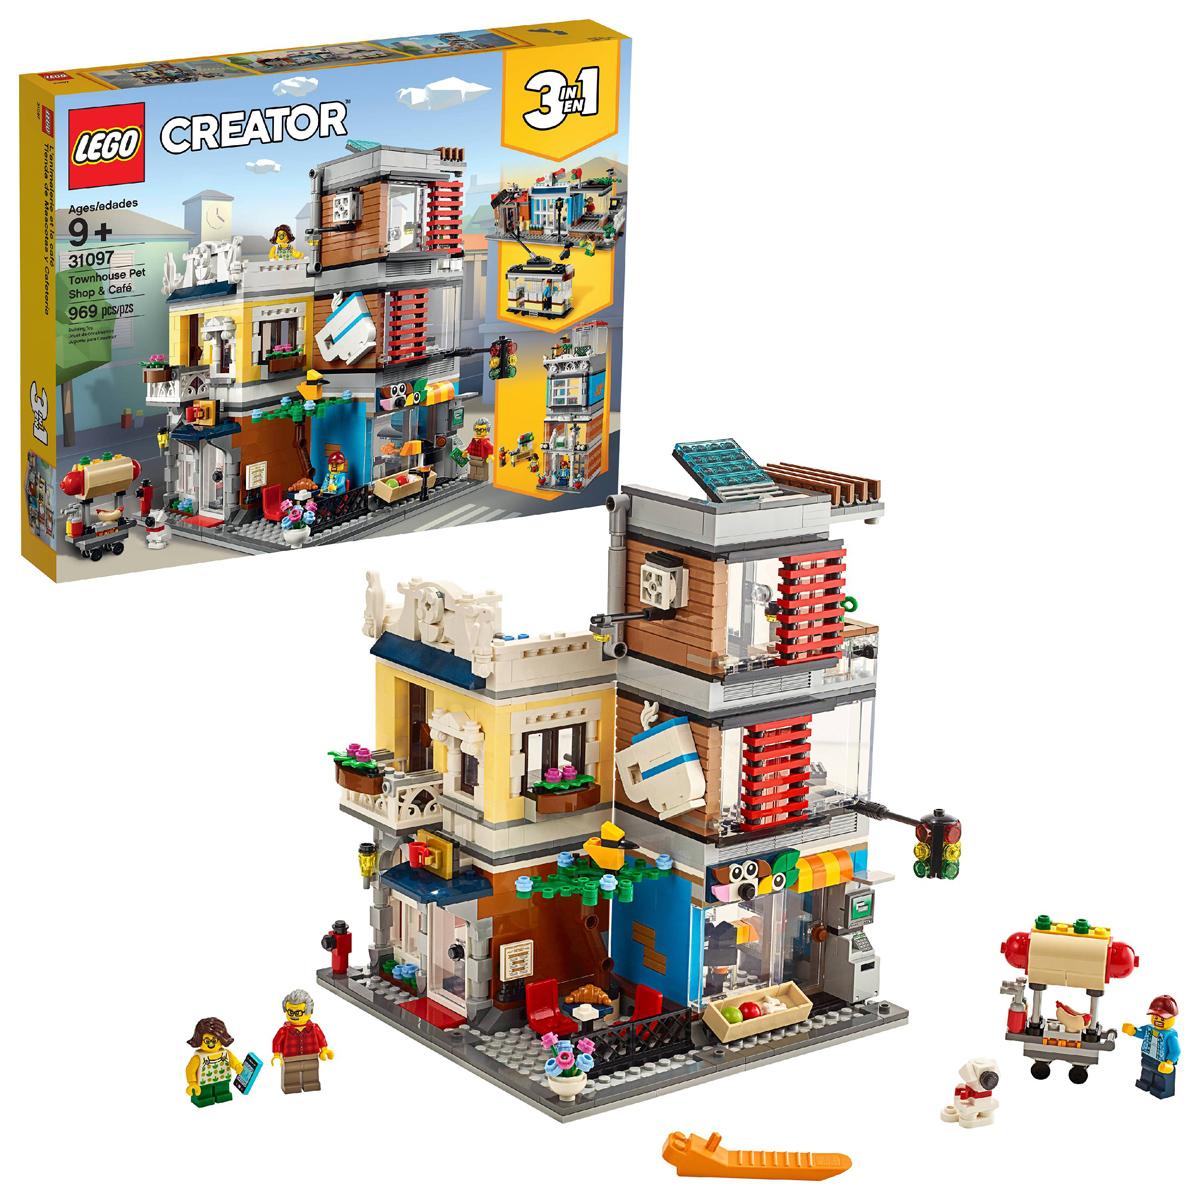 Lego Creator 3-in-1 Townhouse Pet Shop and Cafe Building Set for $63.99 Shipped